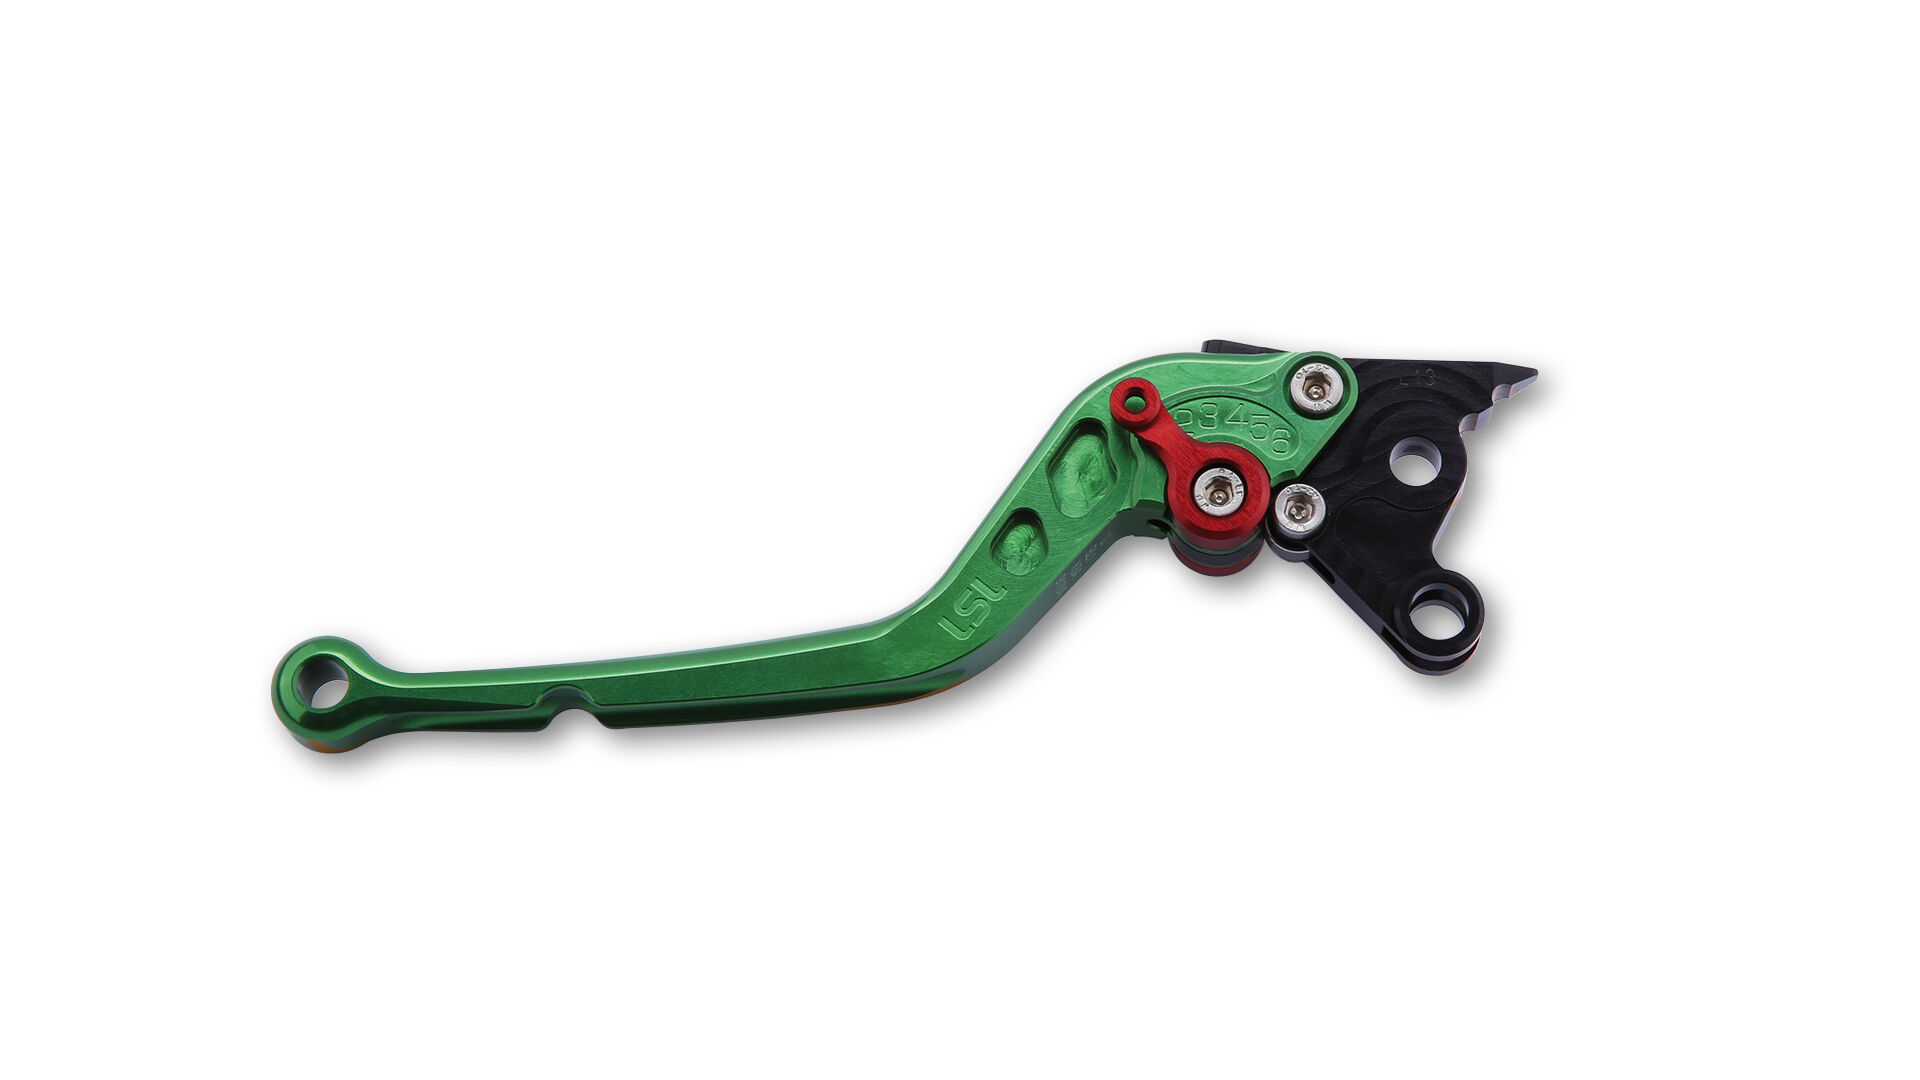 Lsl Clutch Lever Classic L24, Green/red, Long  - Red